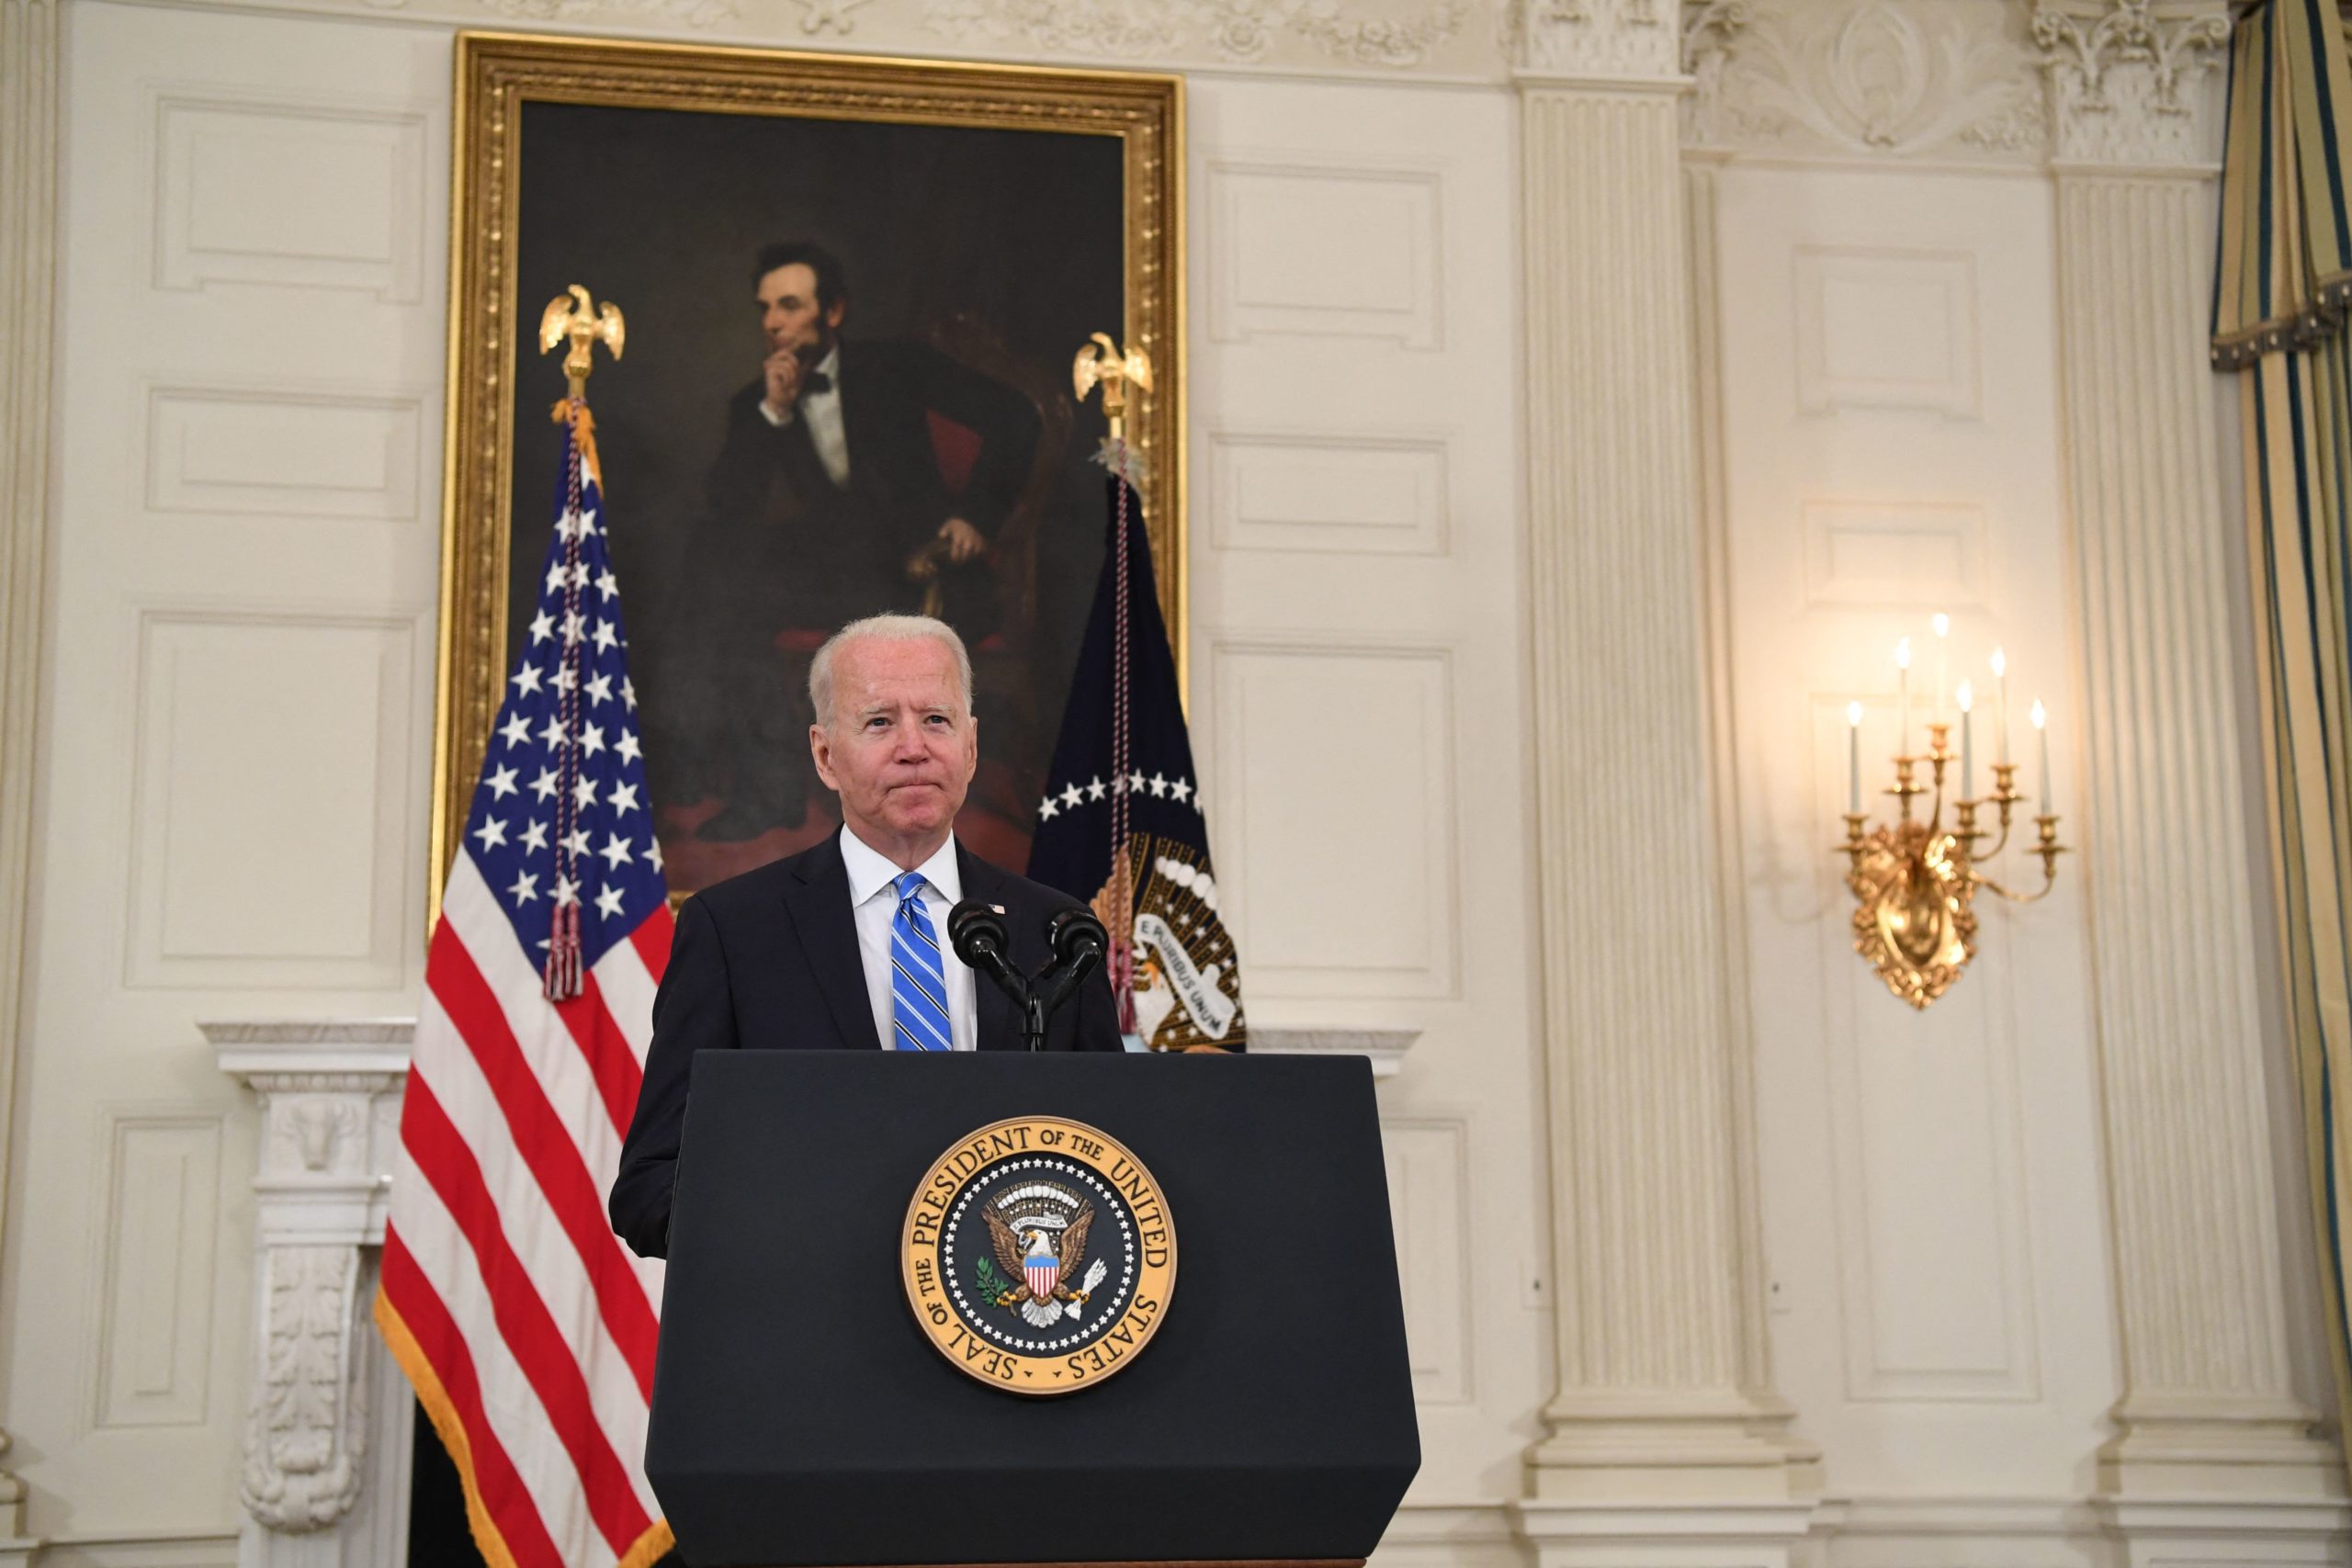 US President Joe Biden speaks about the economy during the Covid-19 pandemic in the State Dining Room of the White House in Washington, DC, July 19, 2021. (Photo by SAUL LOEB / AFP) (Photo by SAUL LOEB/AFP via Getty Images)